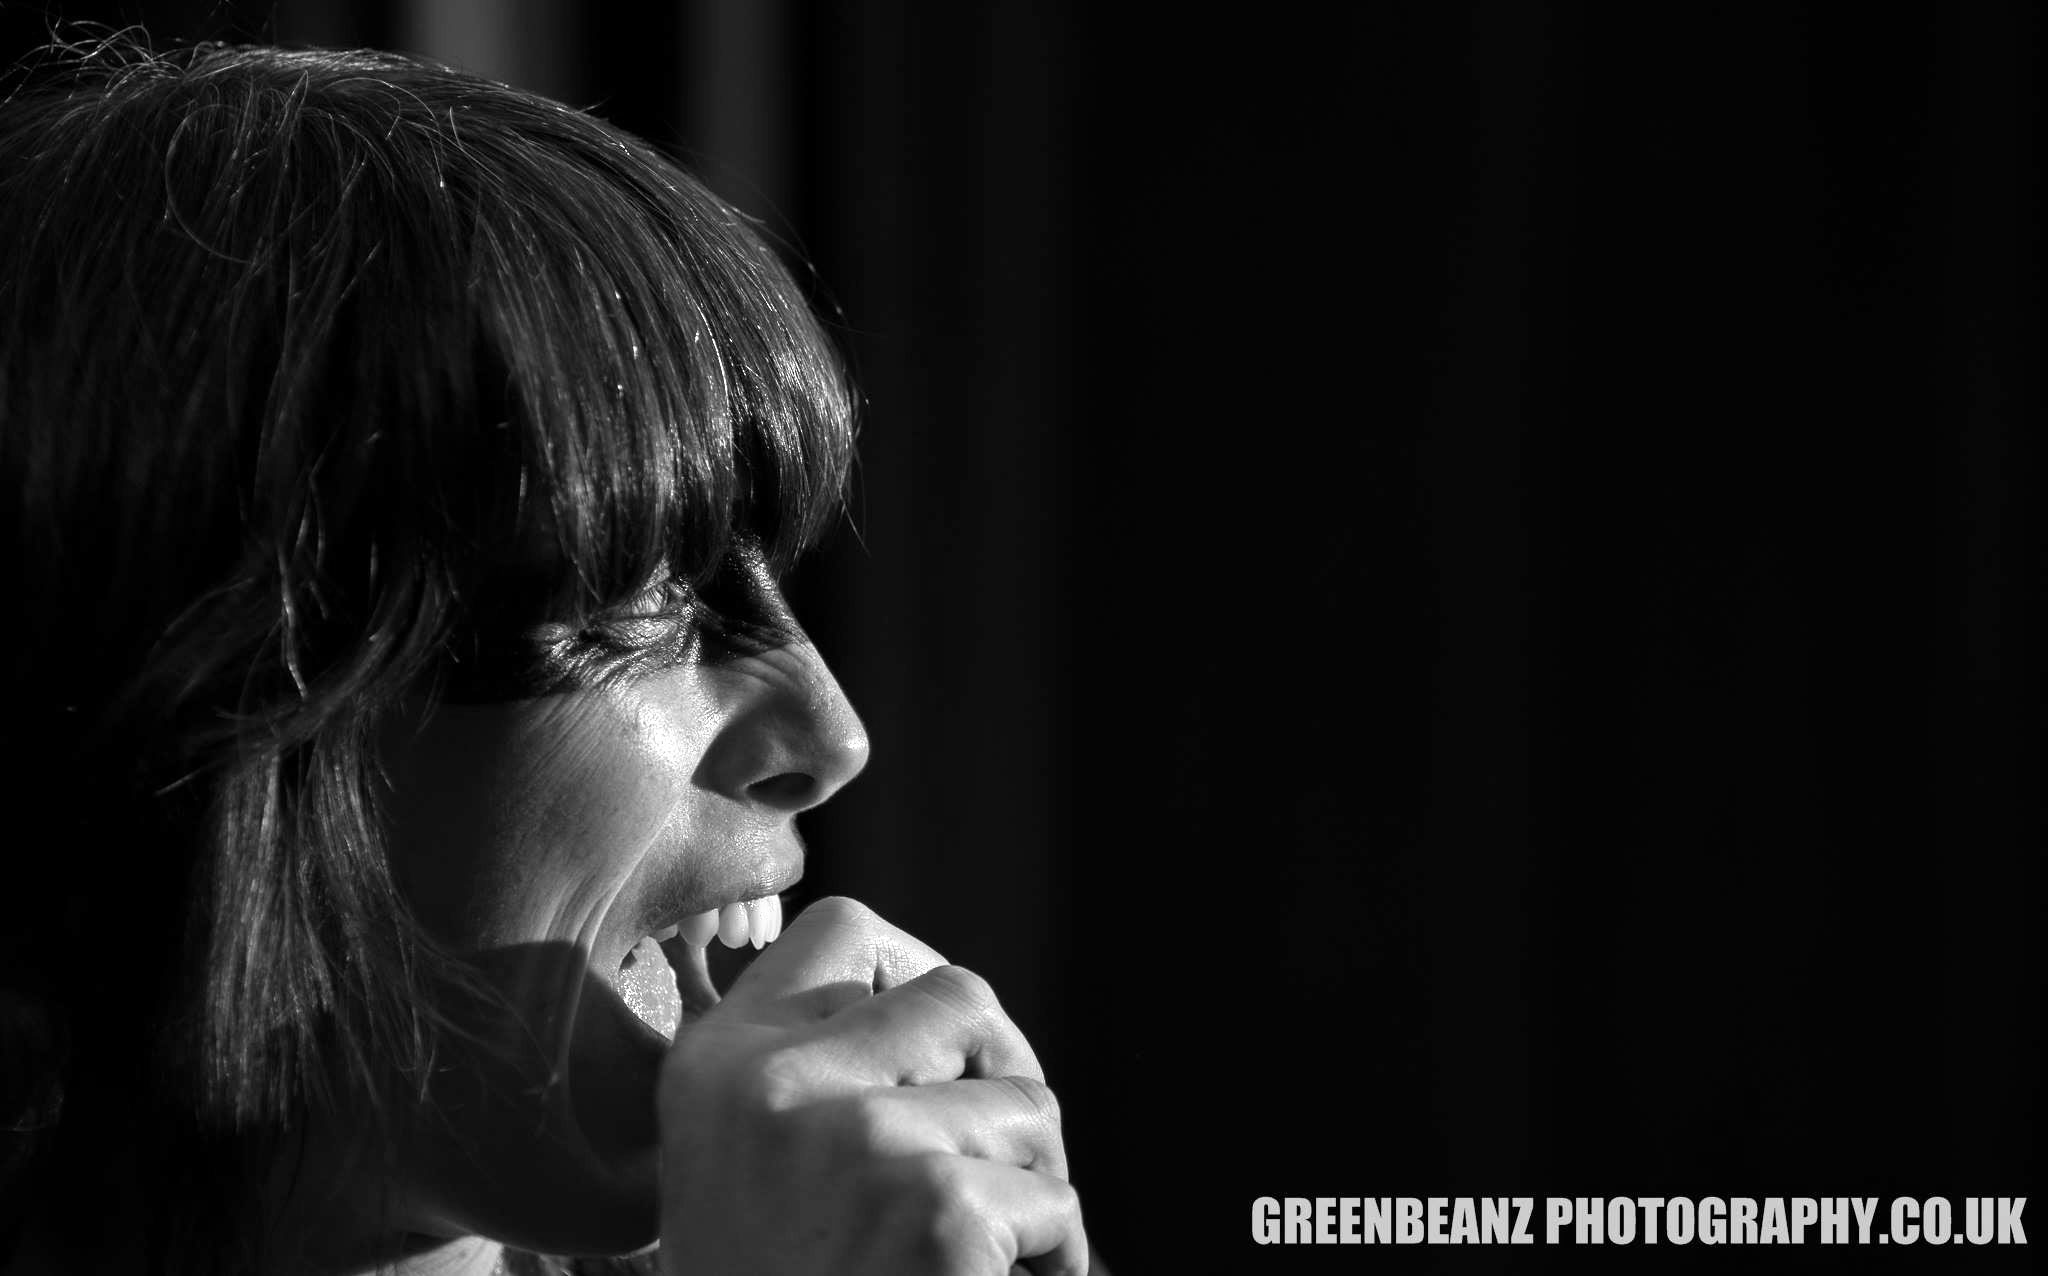 Kelly Green singing with The Eyelids at a Plymouth Gig